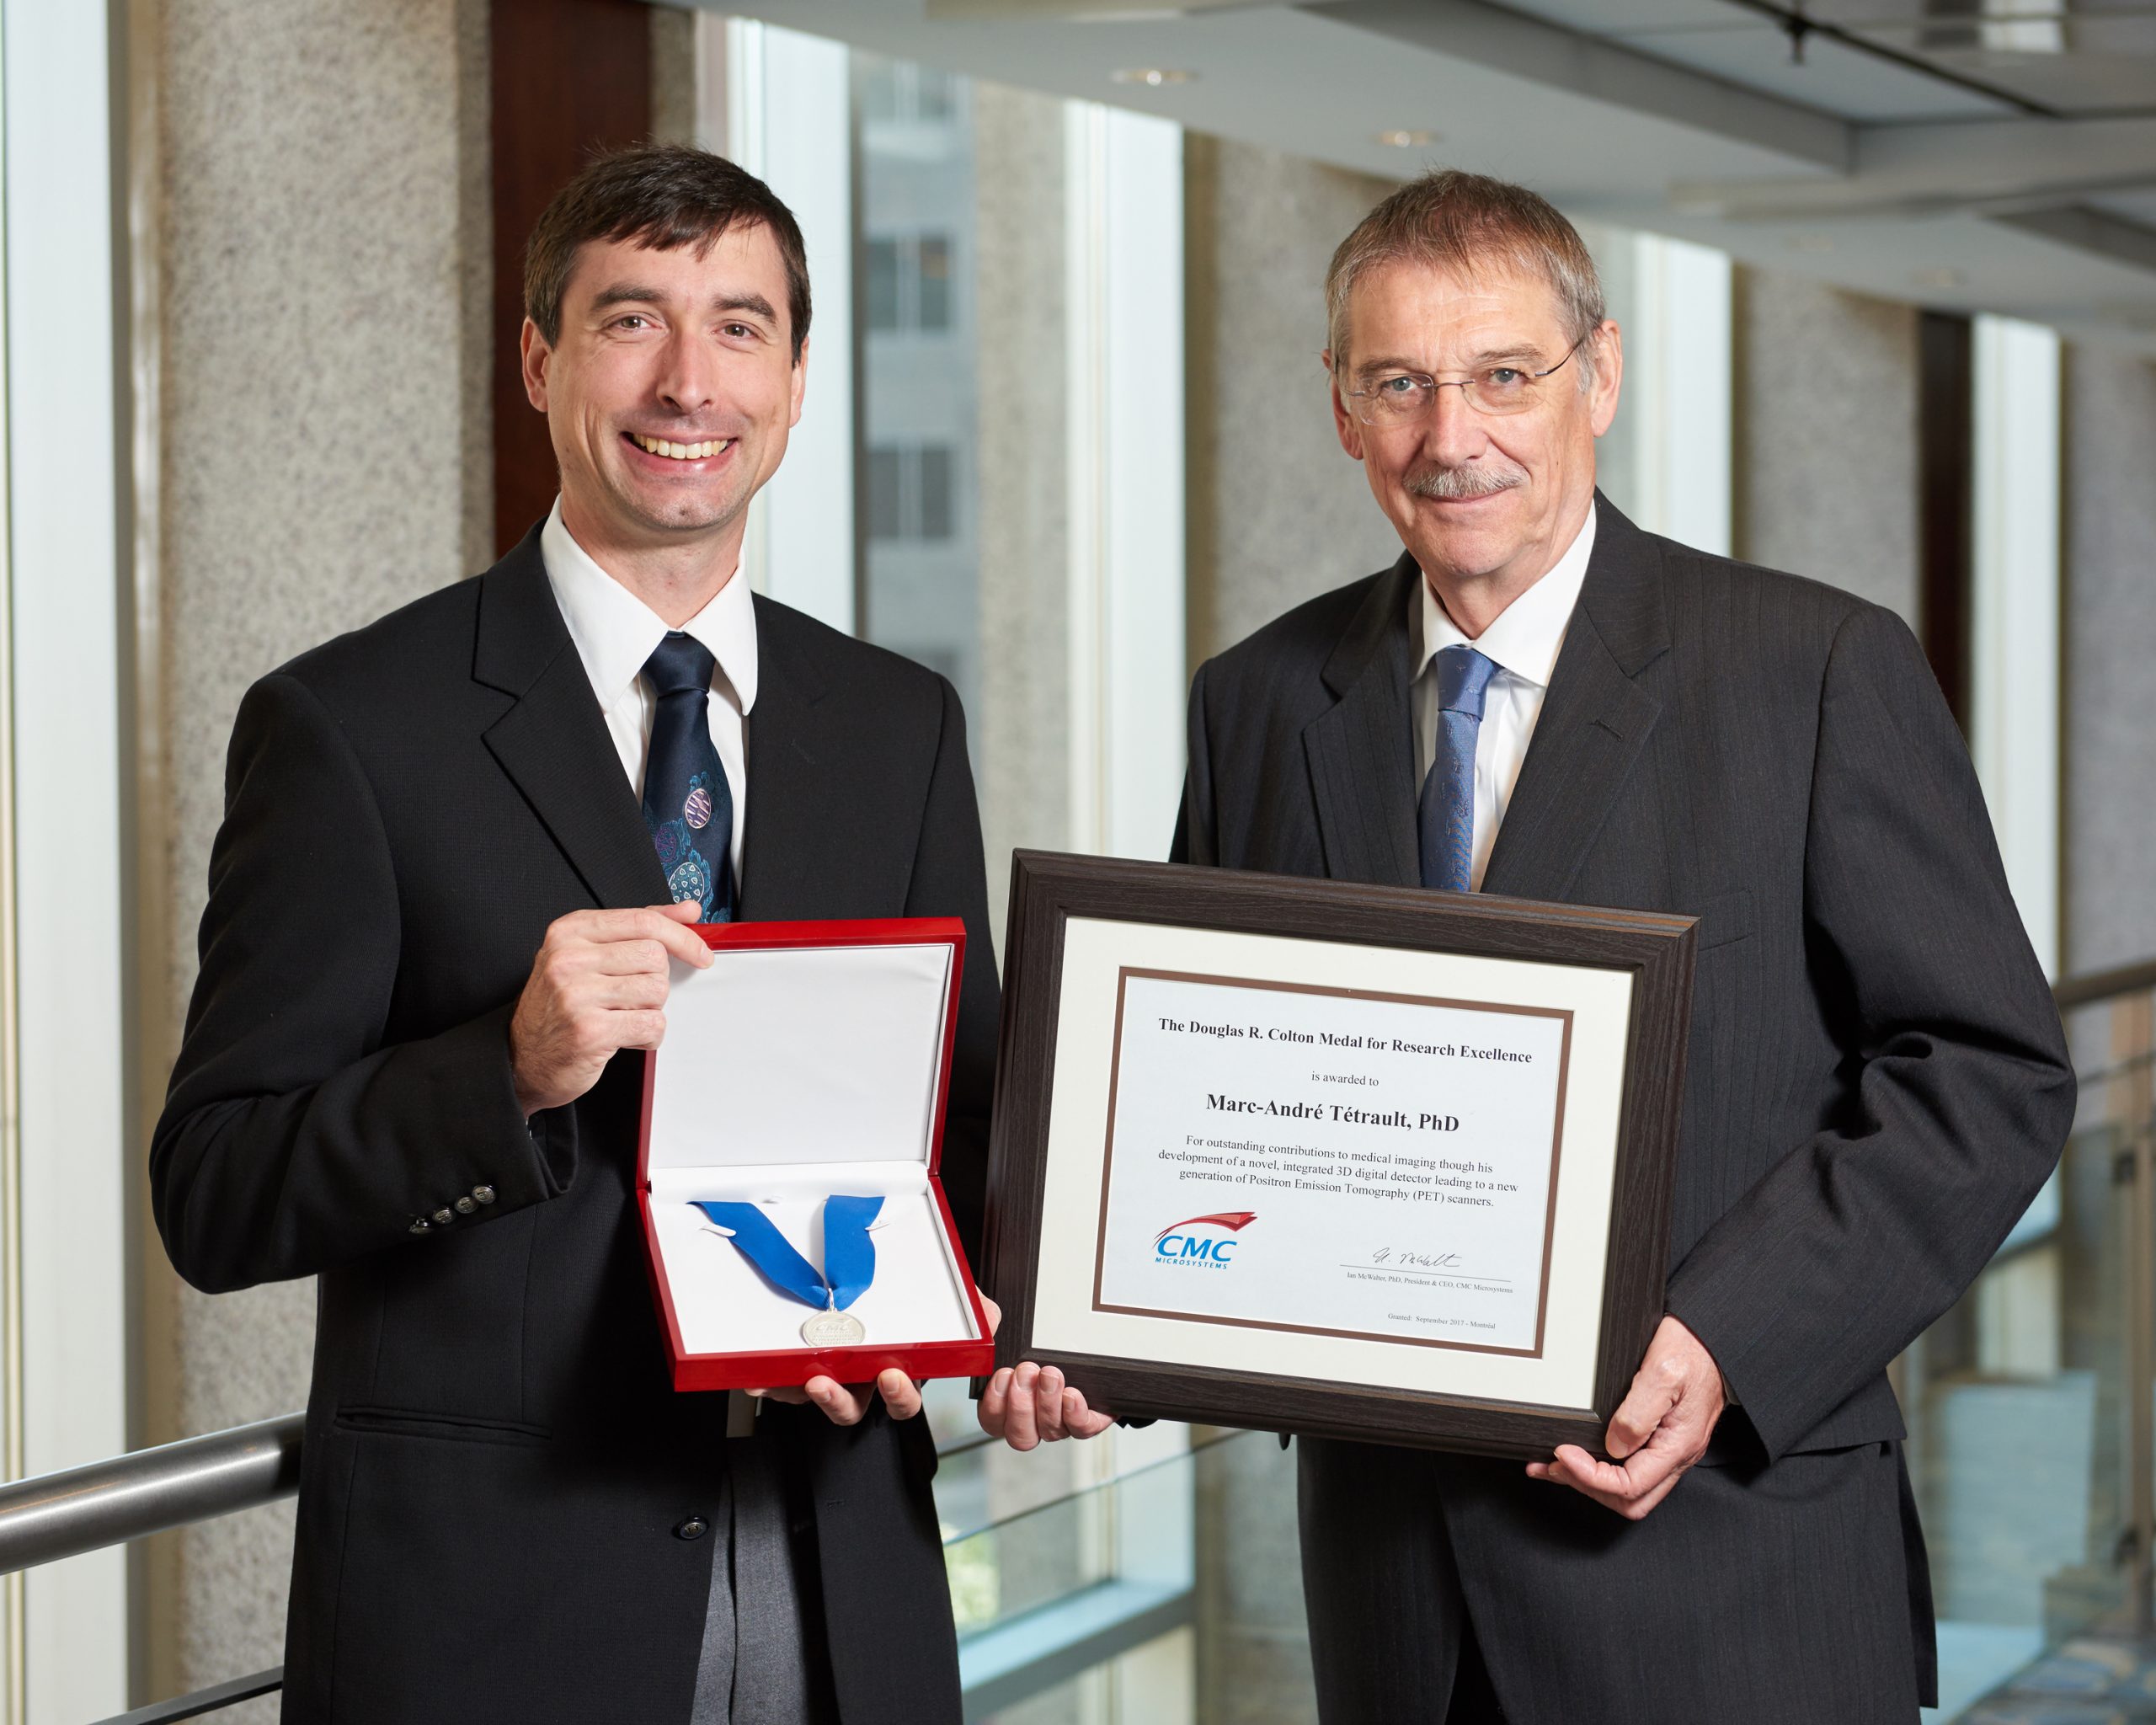 Dr. Marc-André Tétrault & Dr. Ian McWalter holding Colton certificate and medal